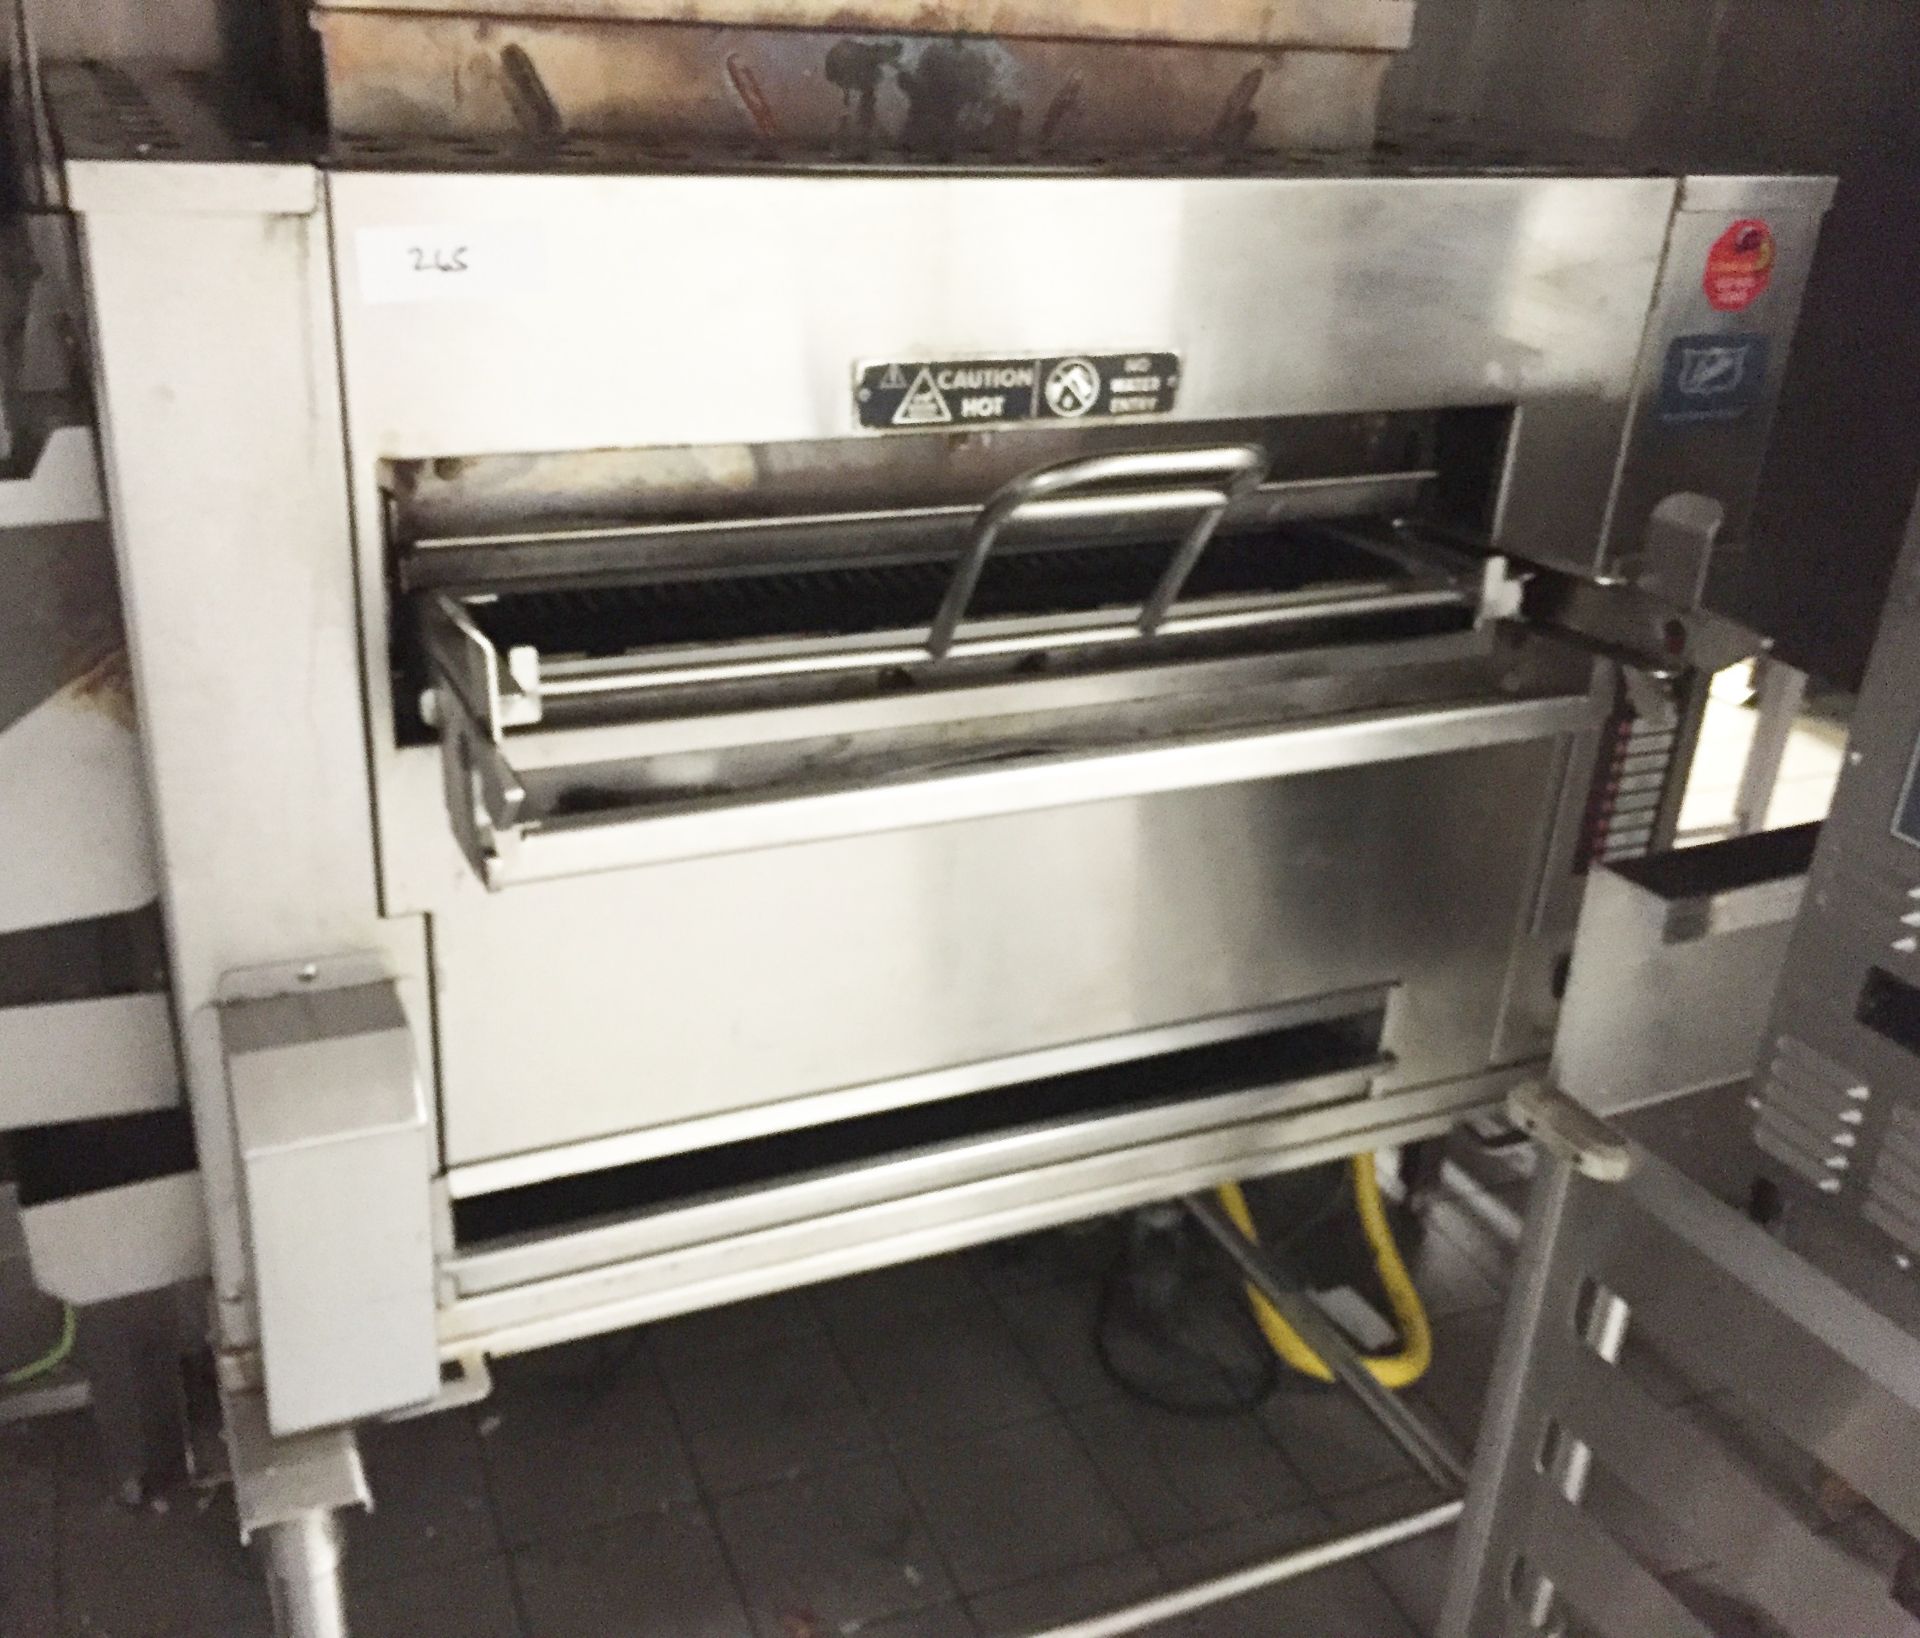 1 x Duke Flexible Batch Broiler - Used in Burger King Restaurants - Flame Broils a Batch of - Image 2 of 6